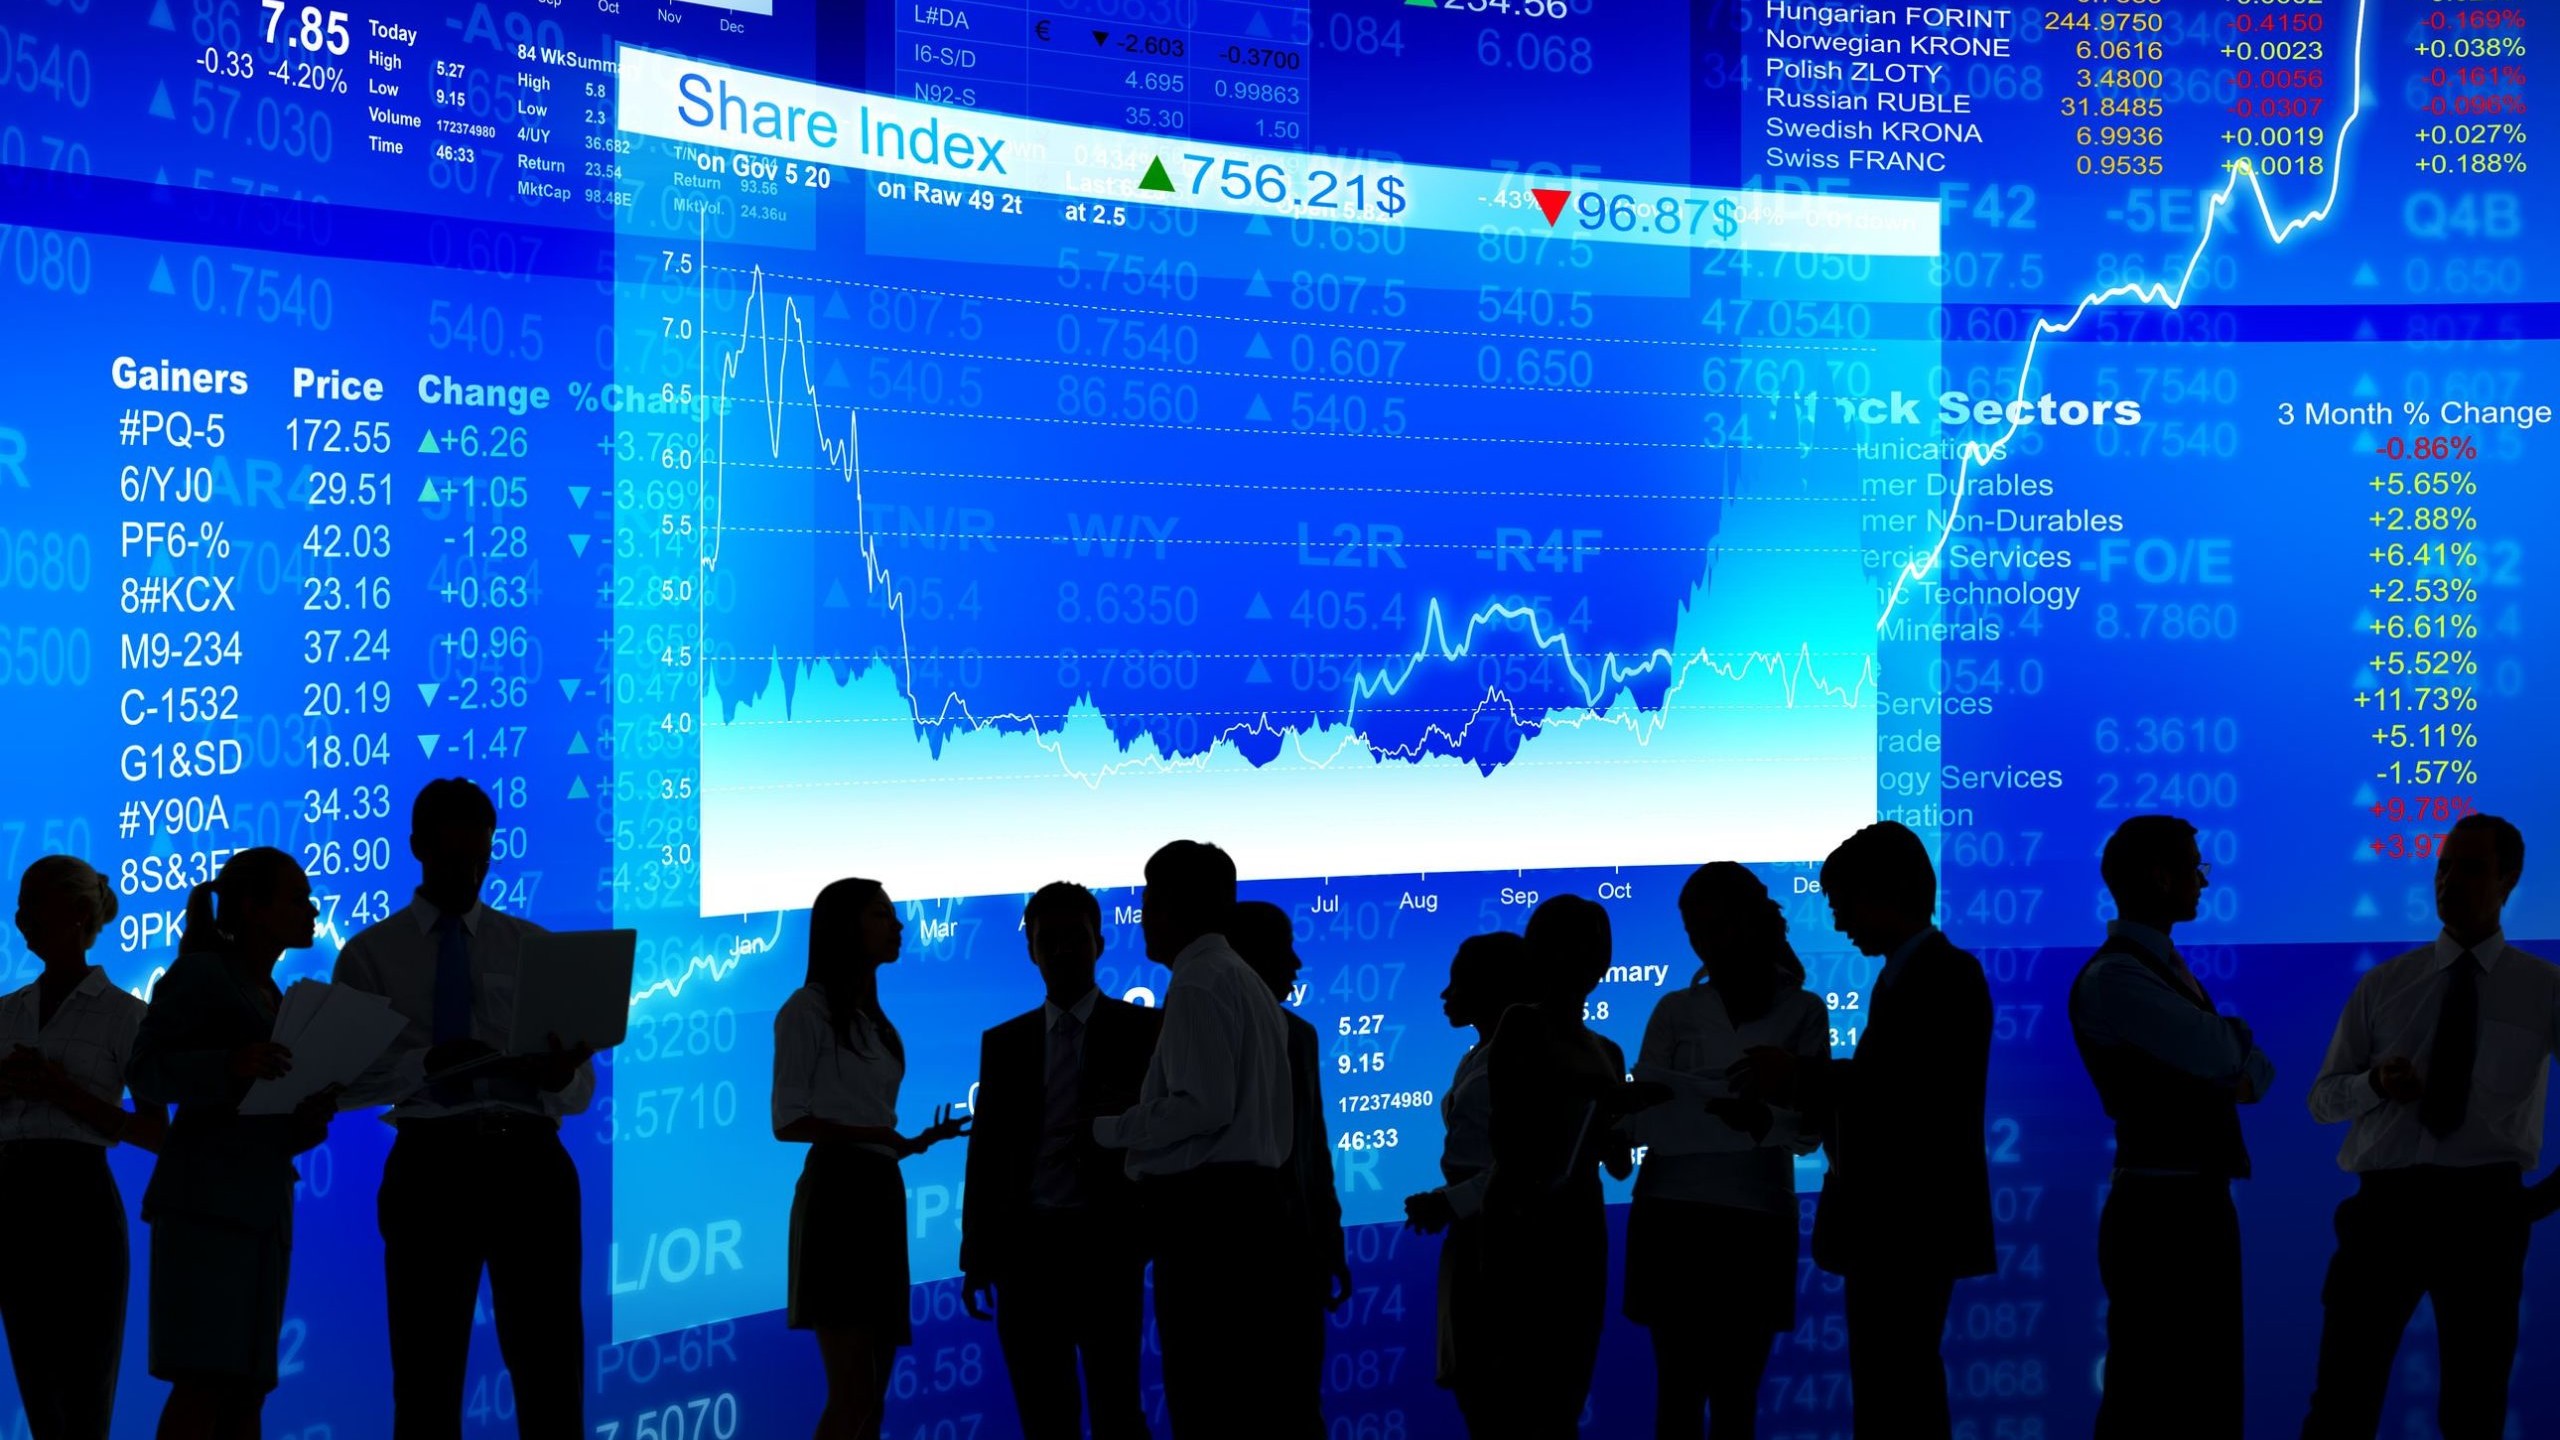 People in silhouette in front of market reports on a large screen.